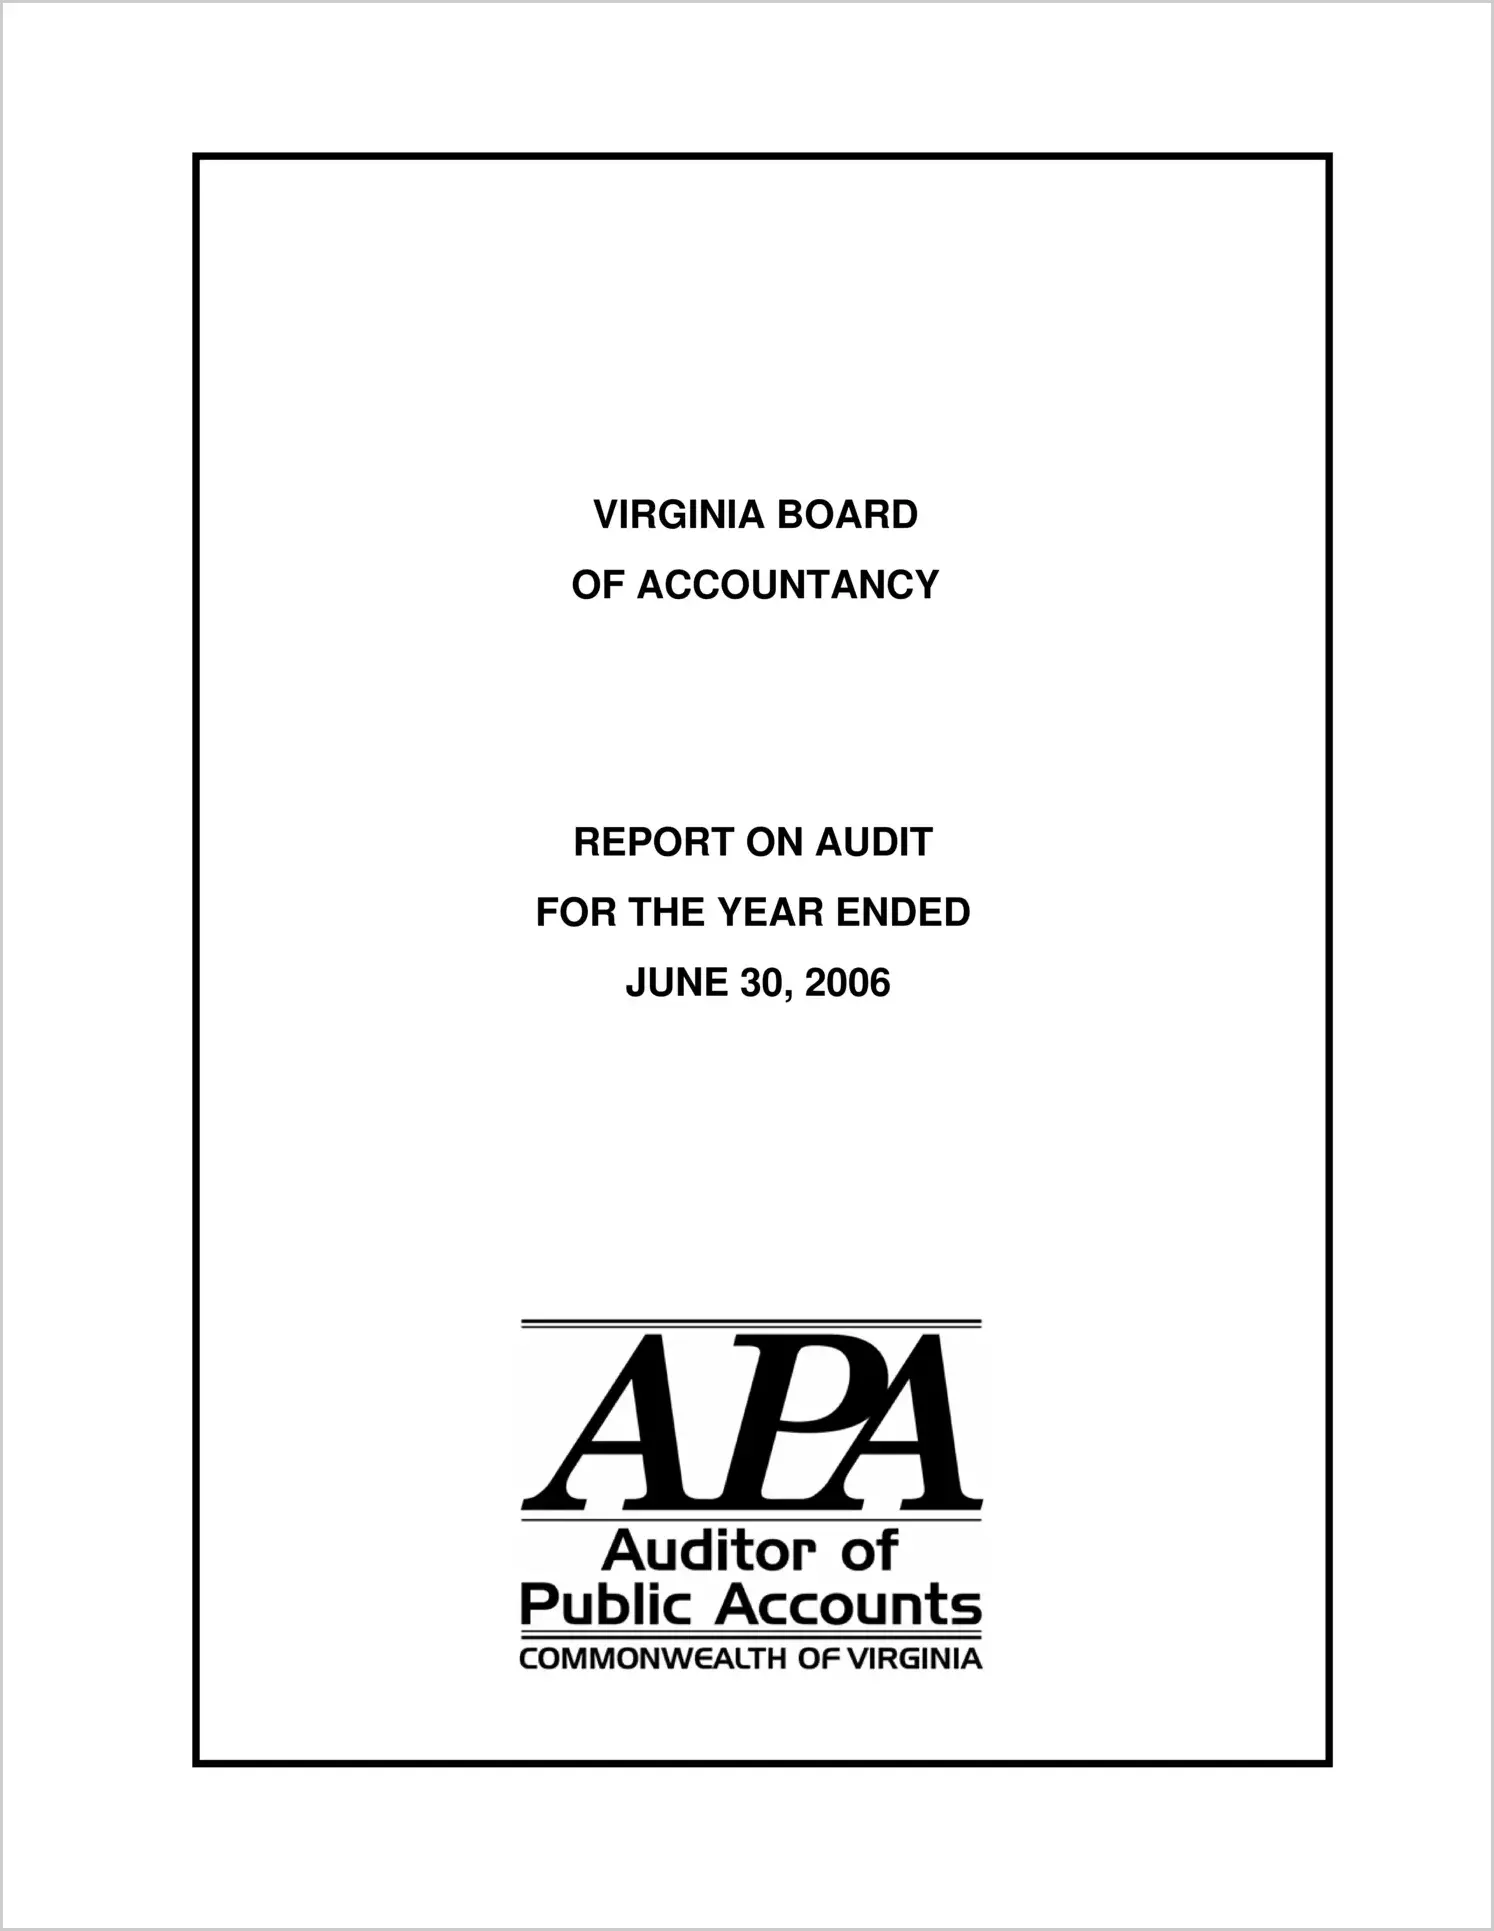 Virginia Board of Accountancy for the year ended June 30, 2006